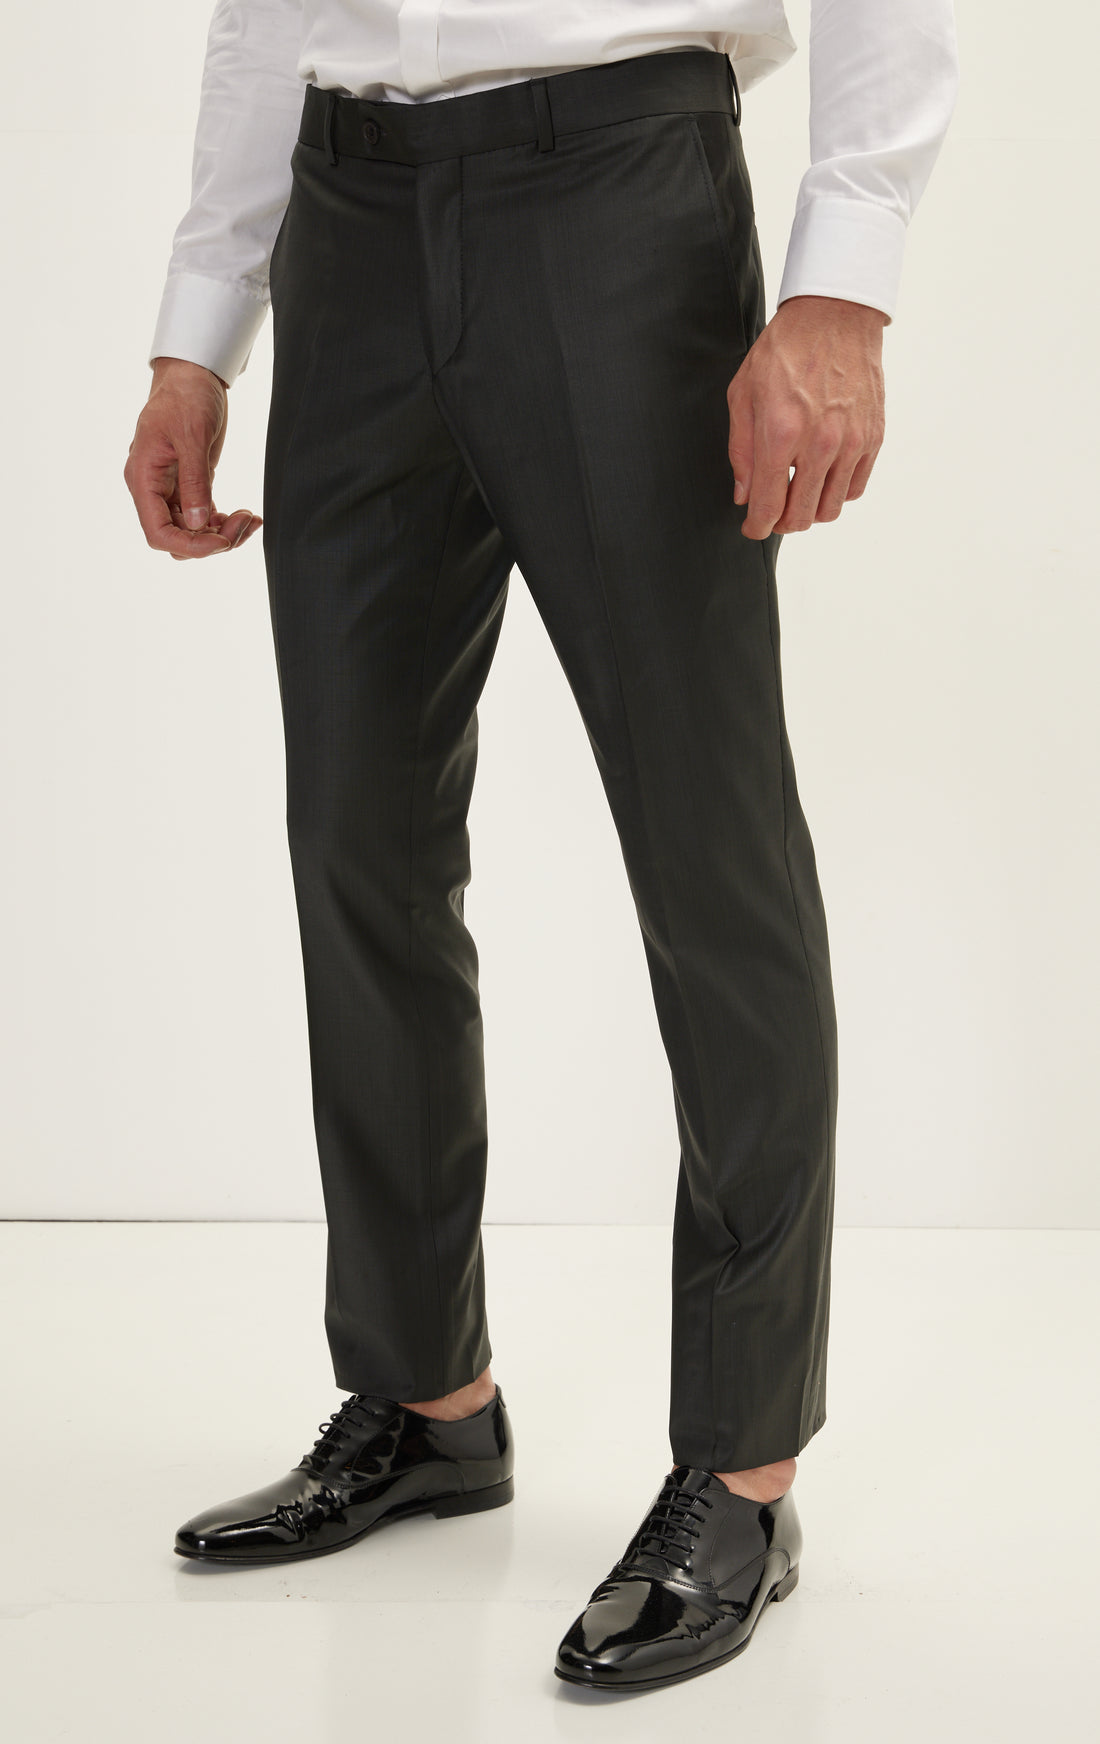 N° R280 MERINO WOOL DOUBLE BREASTED SUIT - CHARCOAL